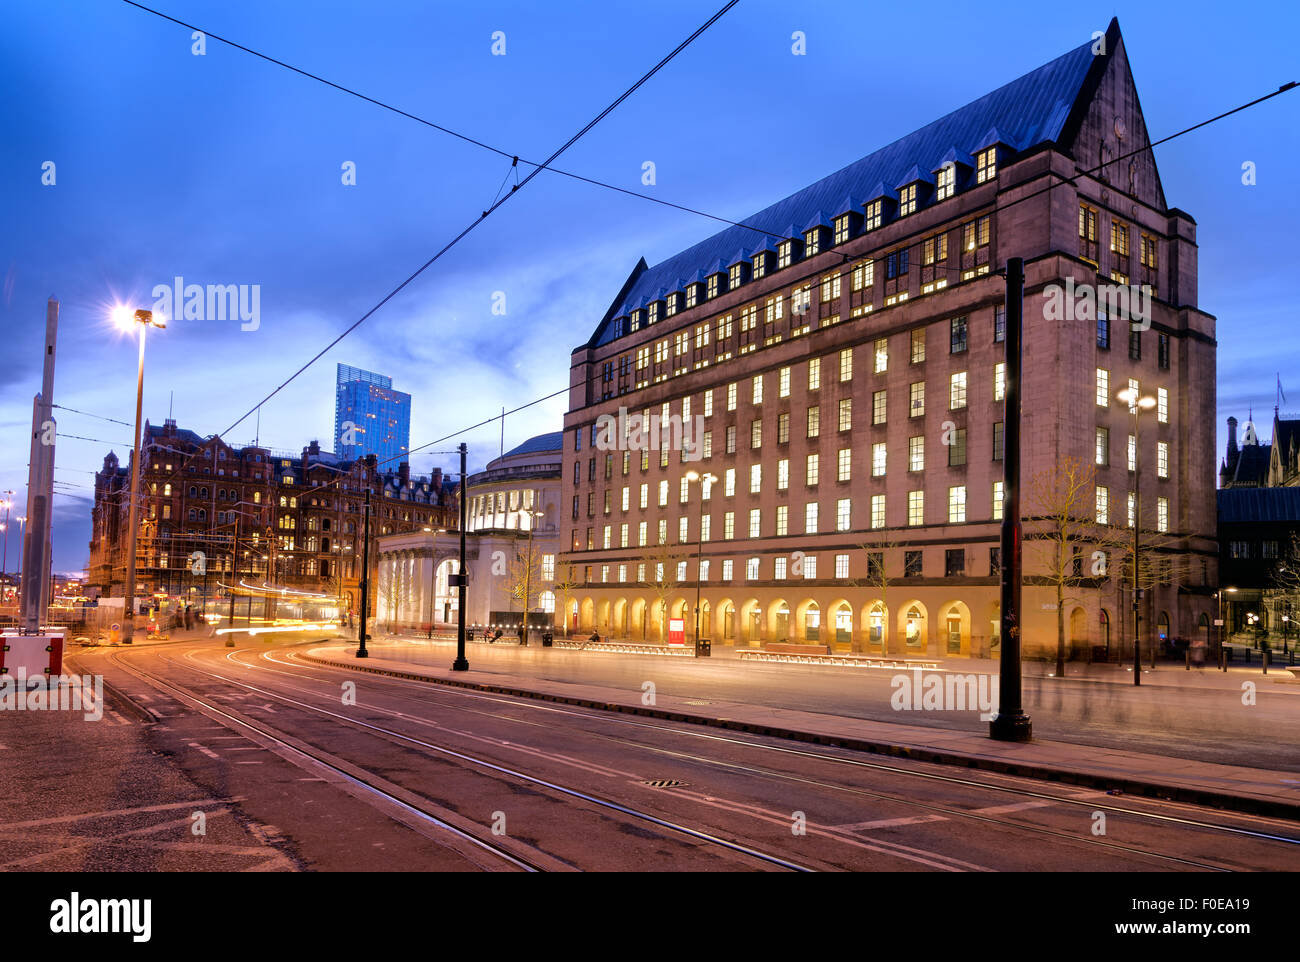 New extension of Manchester town hall. Tram tracks passing in front of the grand building of town hall. Skyline of Manchester. Stock Photo